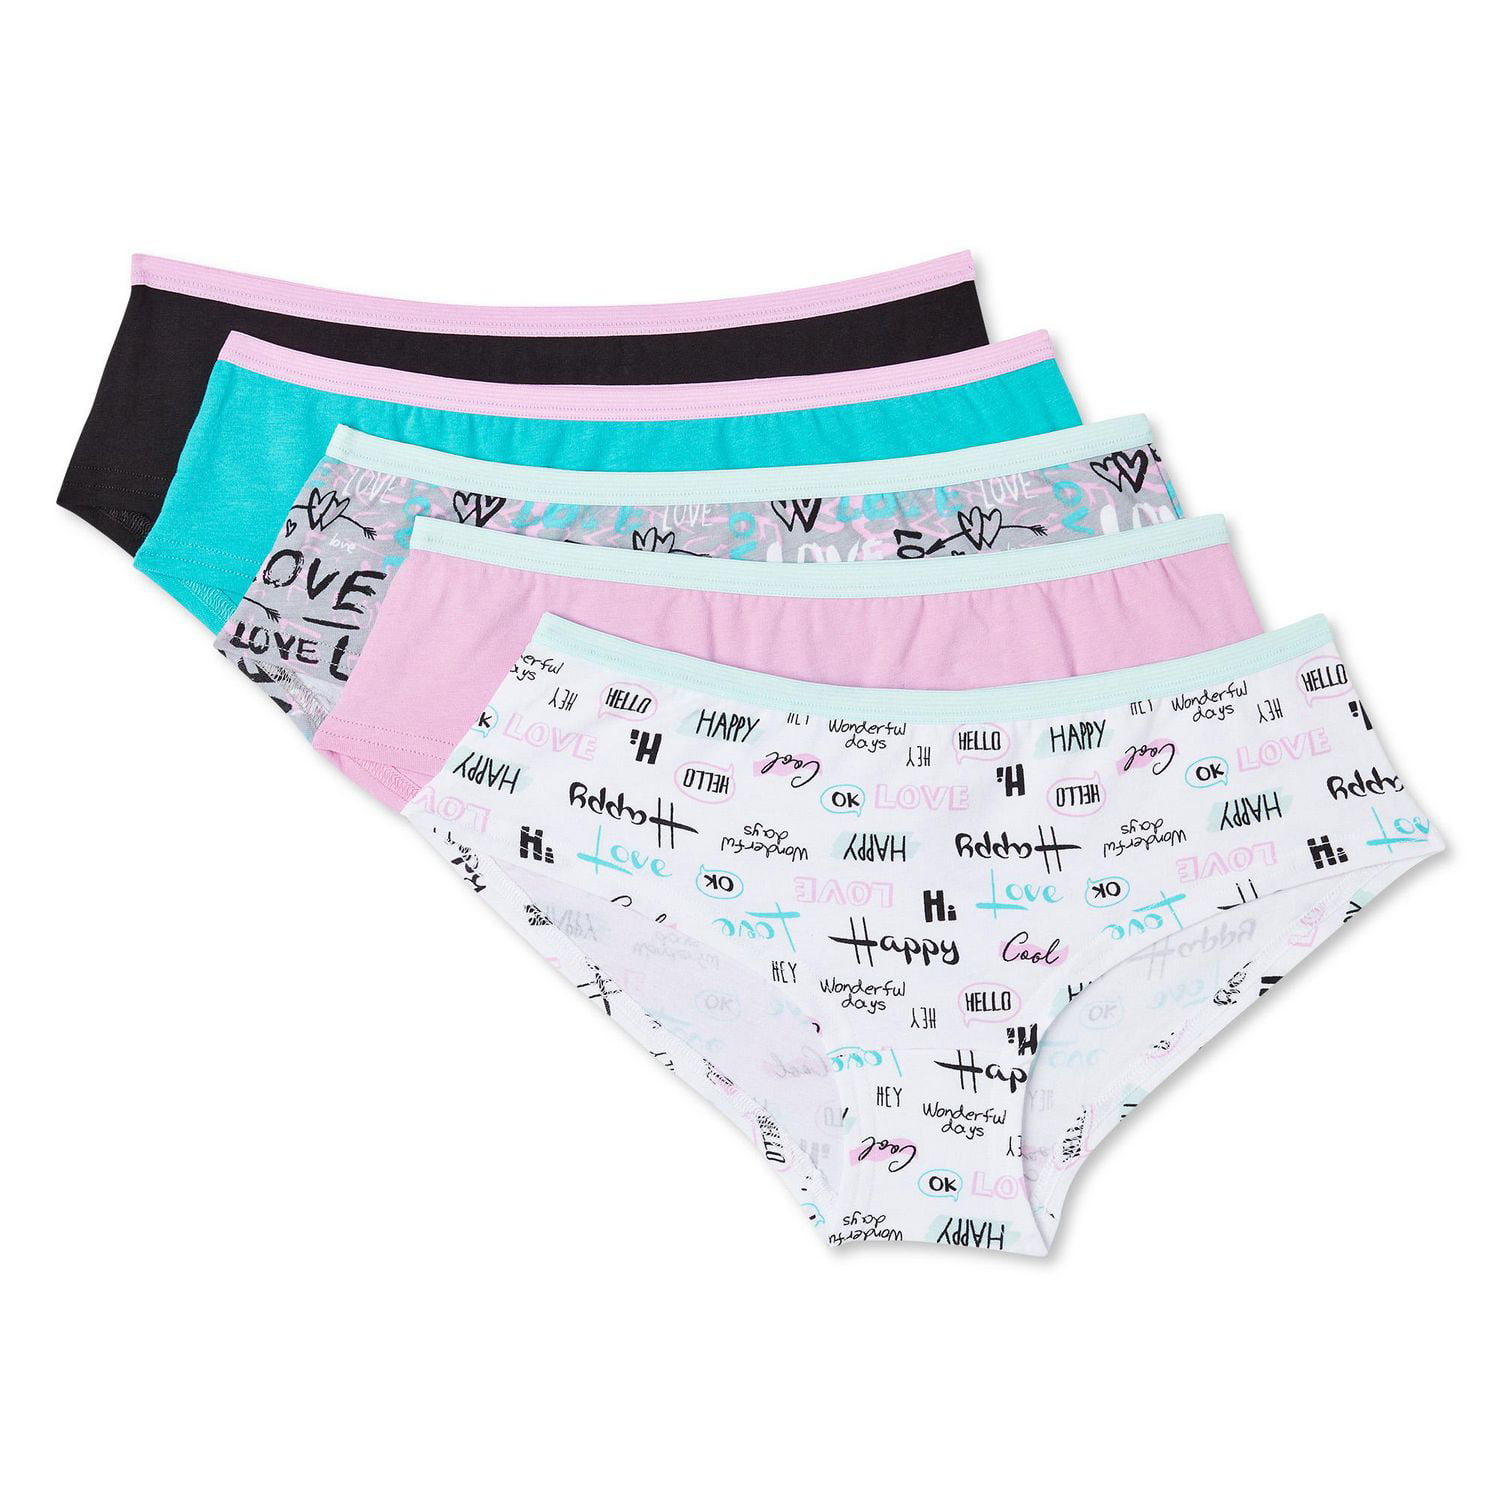 Reebok Girls Multi-Sized Cotton Hipsters 5-Pack Stretch Panties